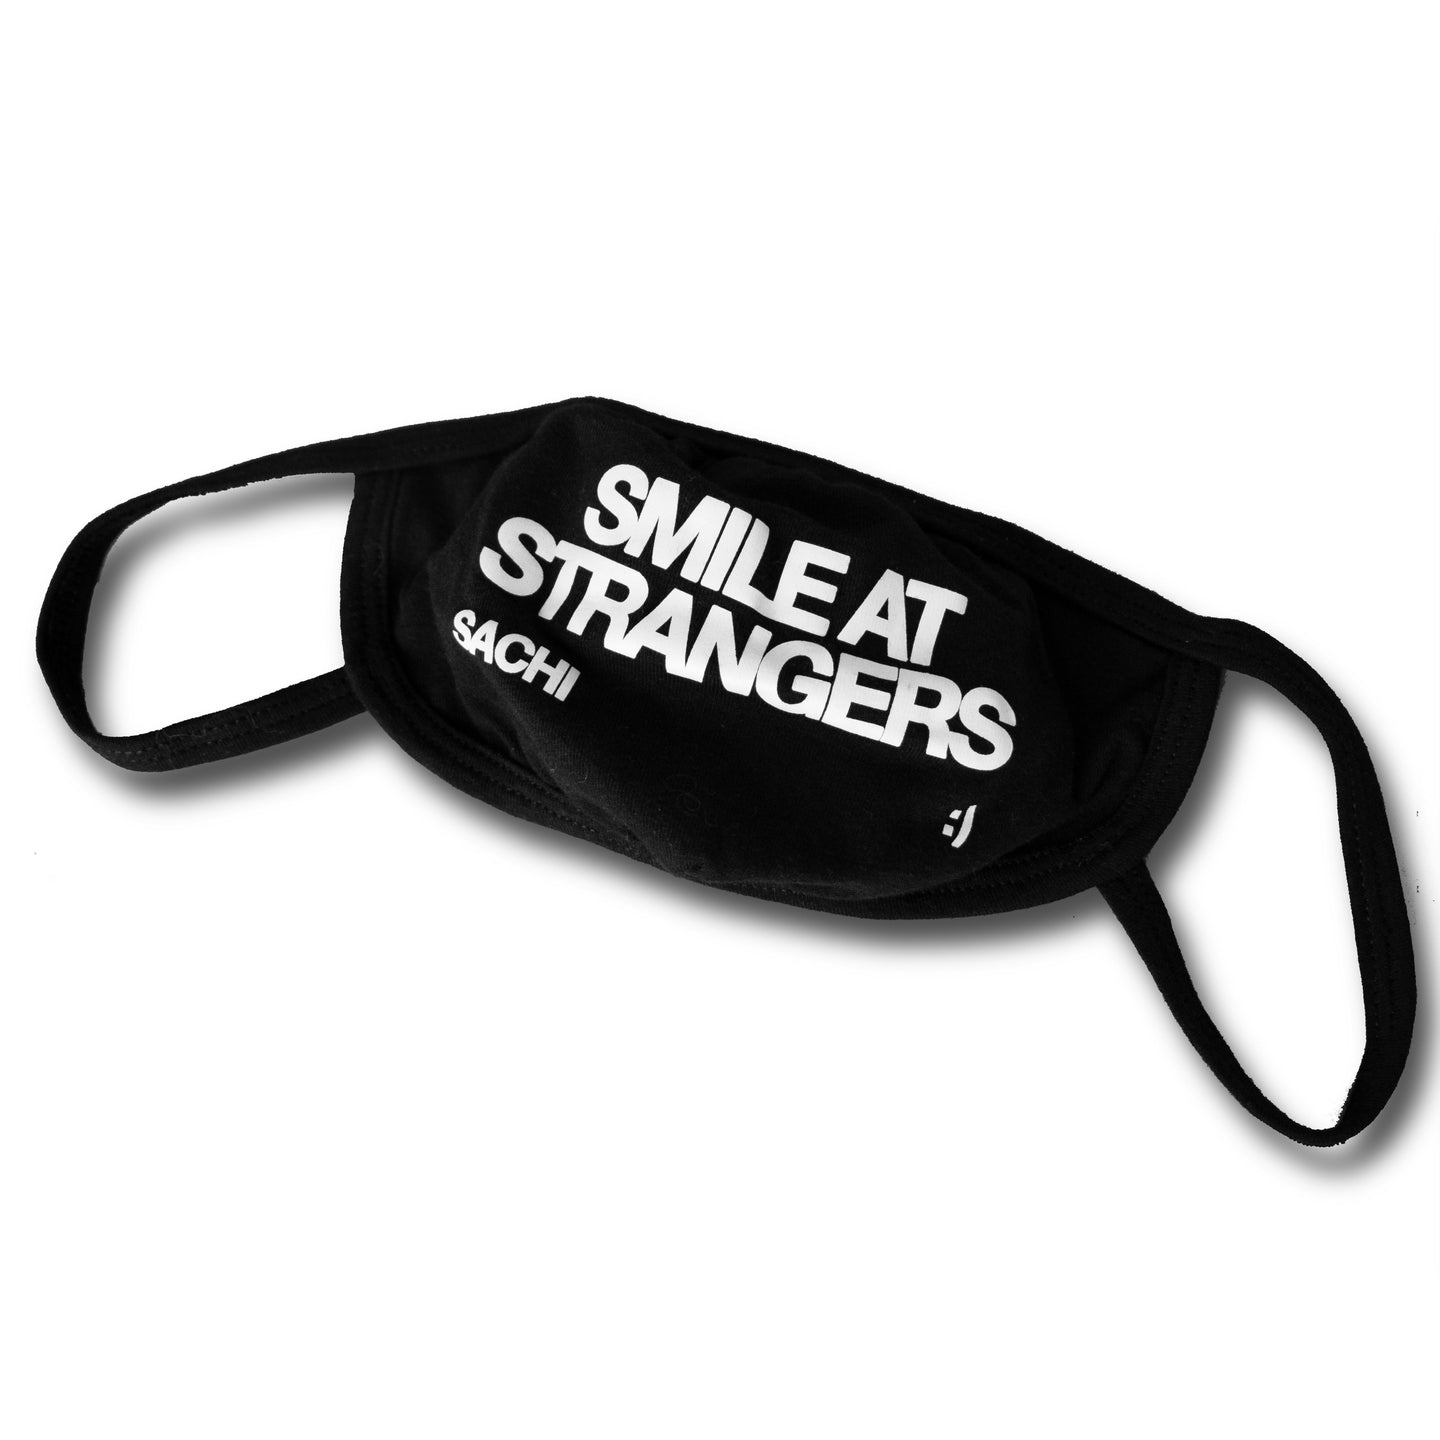 Copy of Smile At Strangers Face Mask